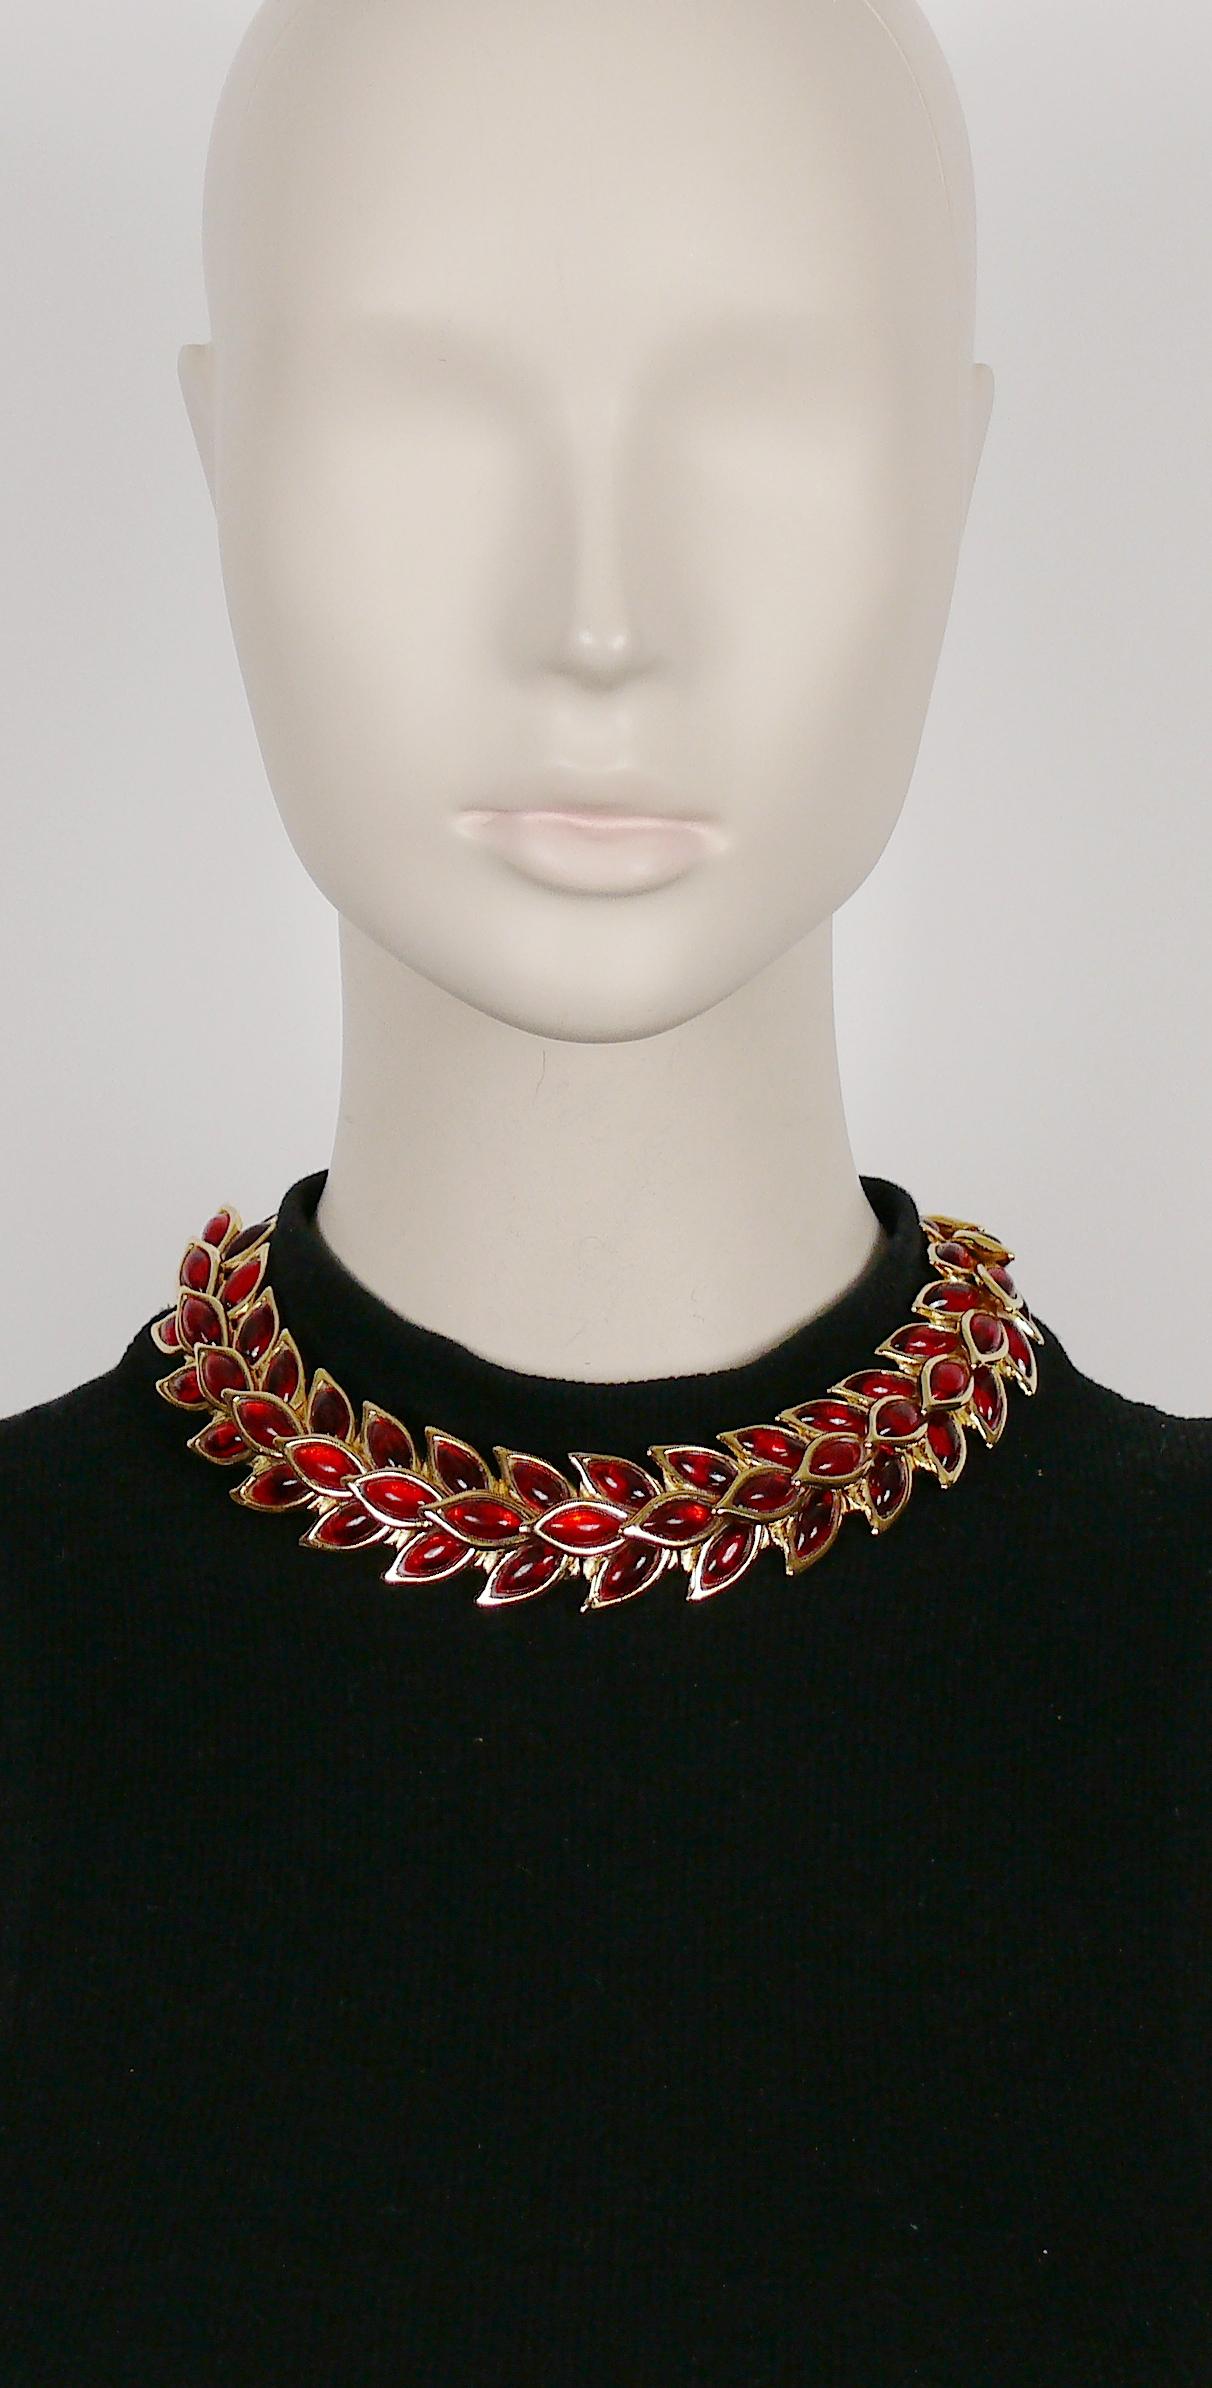 YVES SAINT LAURENT vintage gold toned choker necklace featuring ruby red poured resin in cascading wheat pattern.

Extension chain.
Hook closure.

Embossed YSL Made in France.

Indicative measurements : inner circumference from approx. 36.13 cm